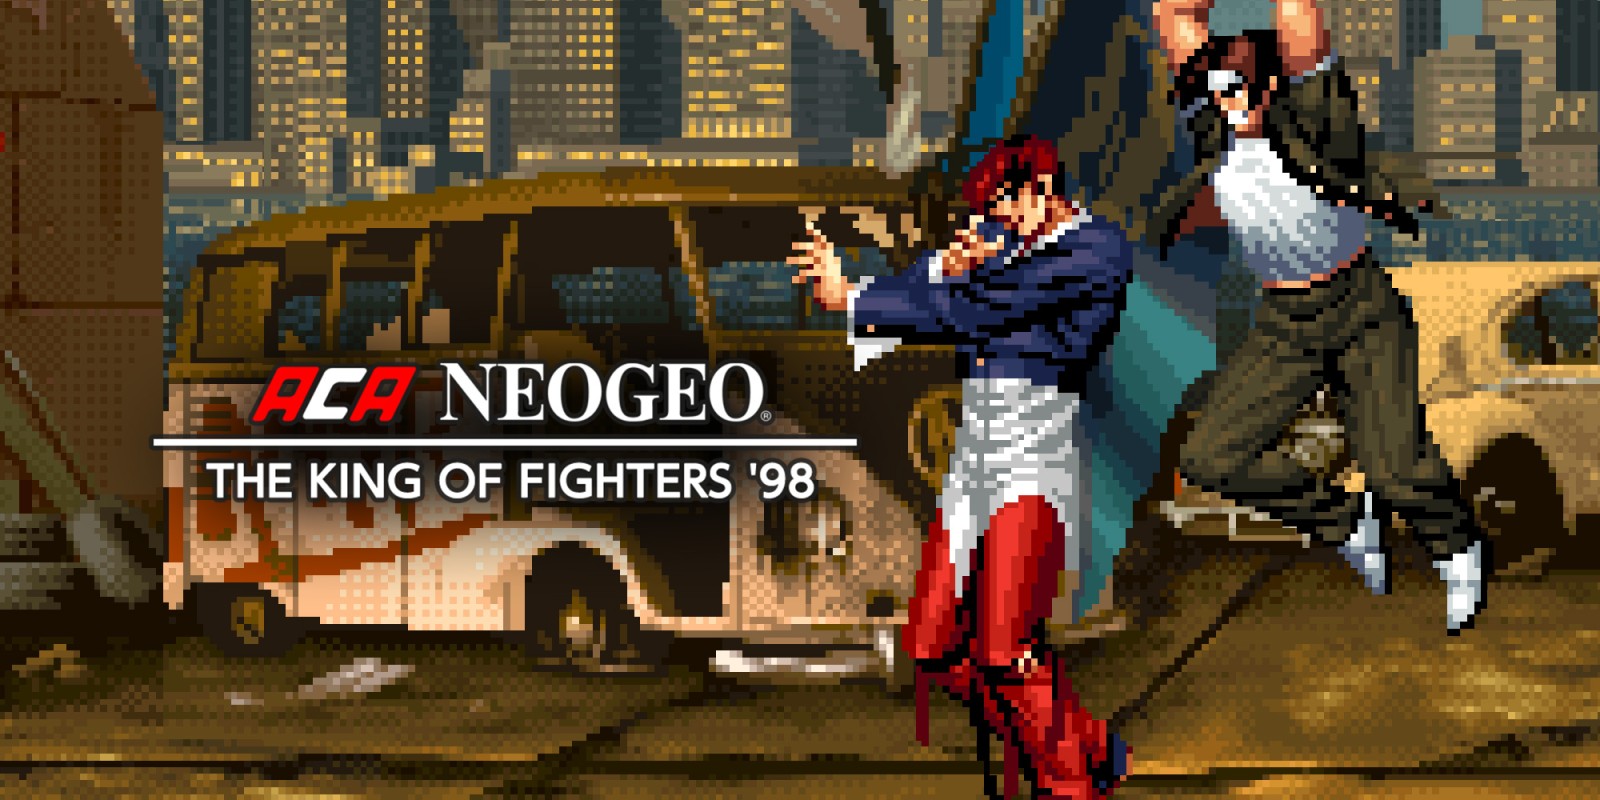 Aca Neogeo The King Of Fighters '98 | Nintendo Switch Download Software |  Games | Nintendo